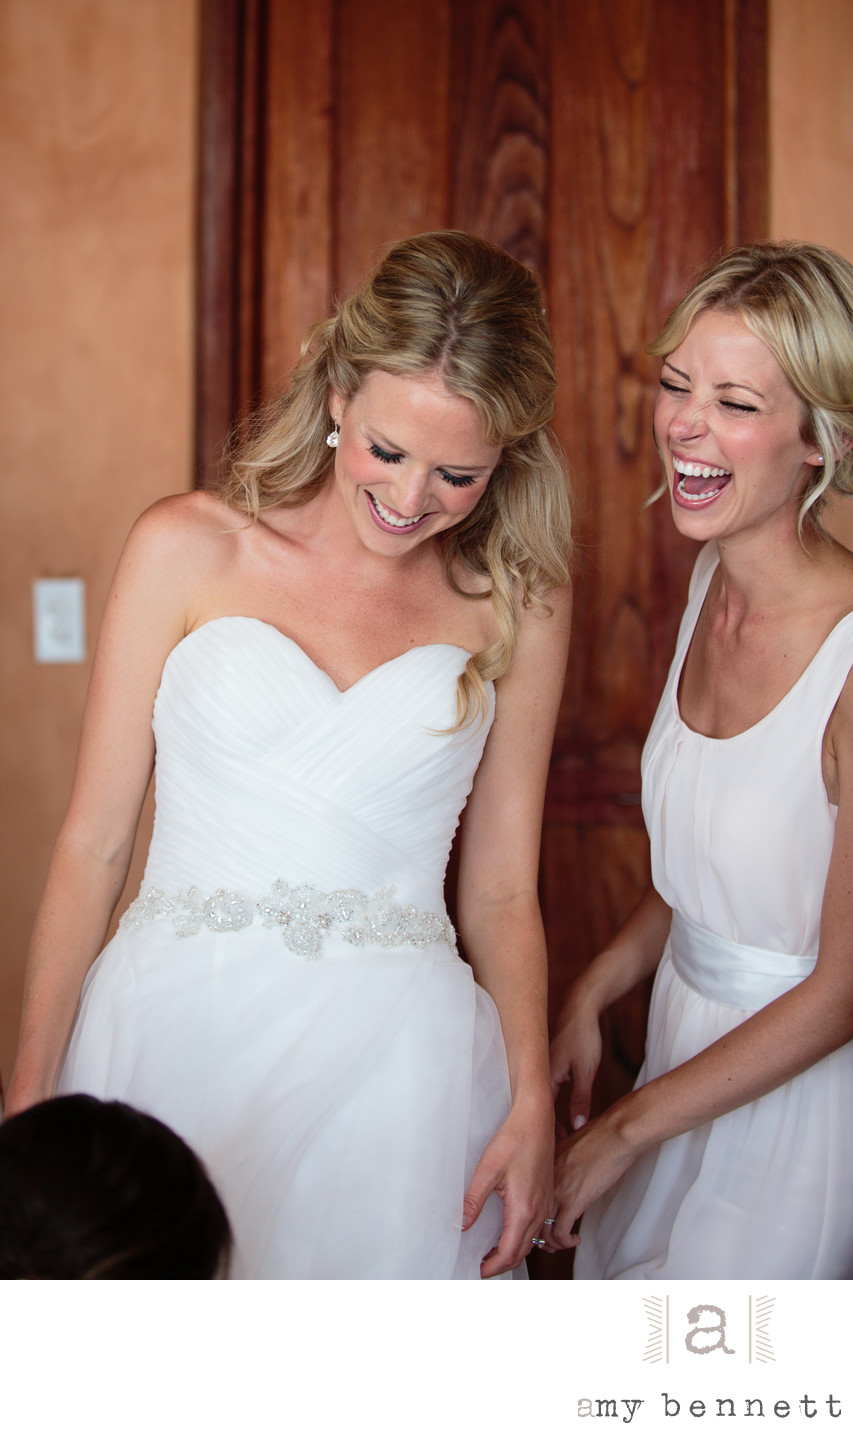 Wedding Moments are for BFFs Too!